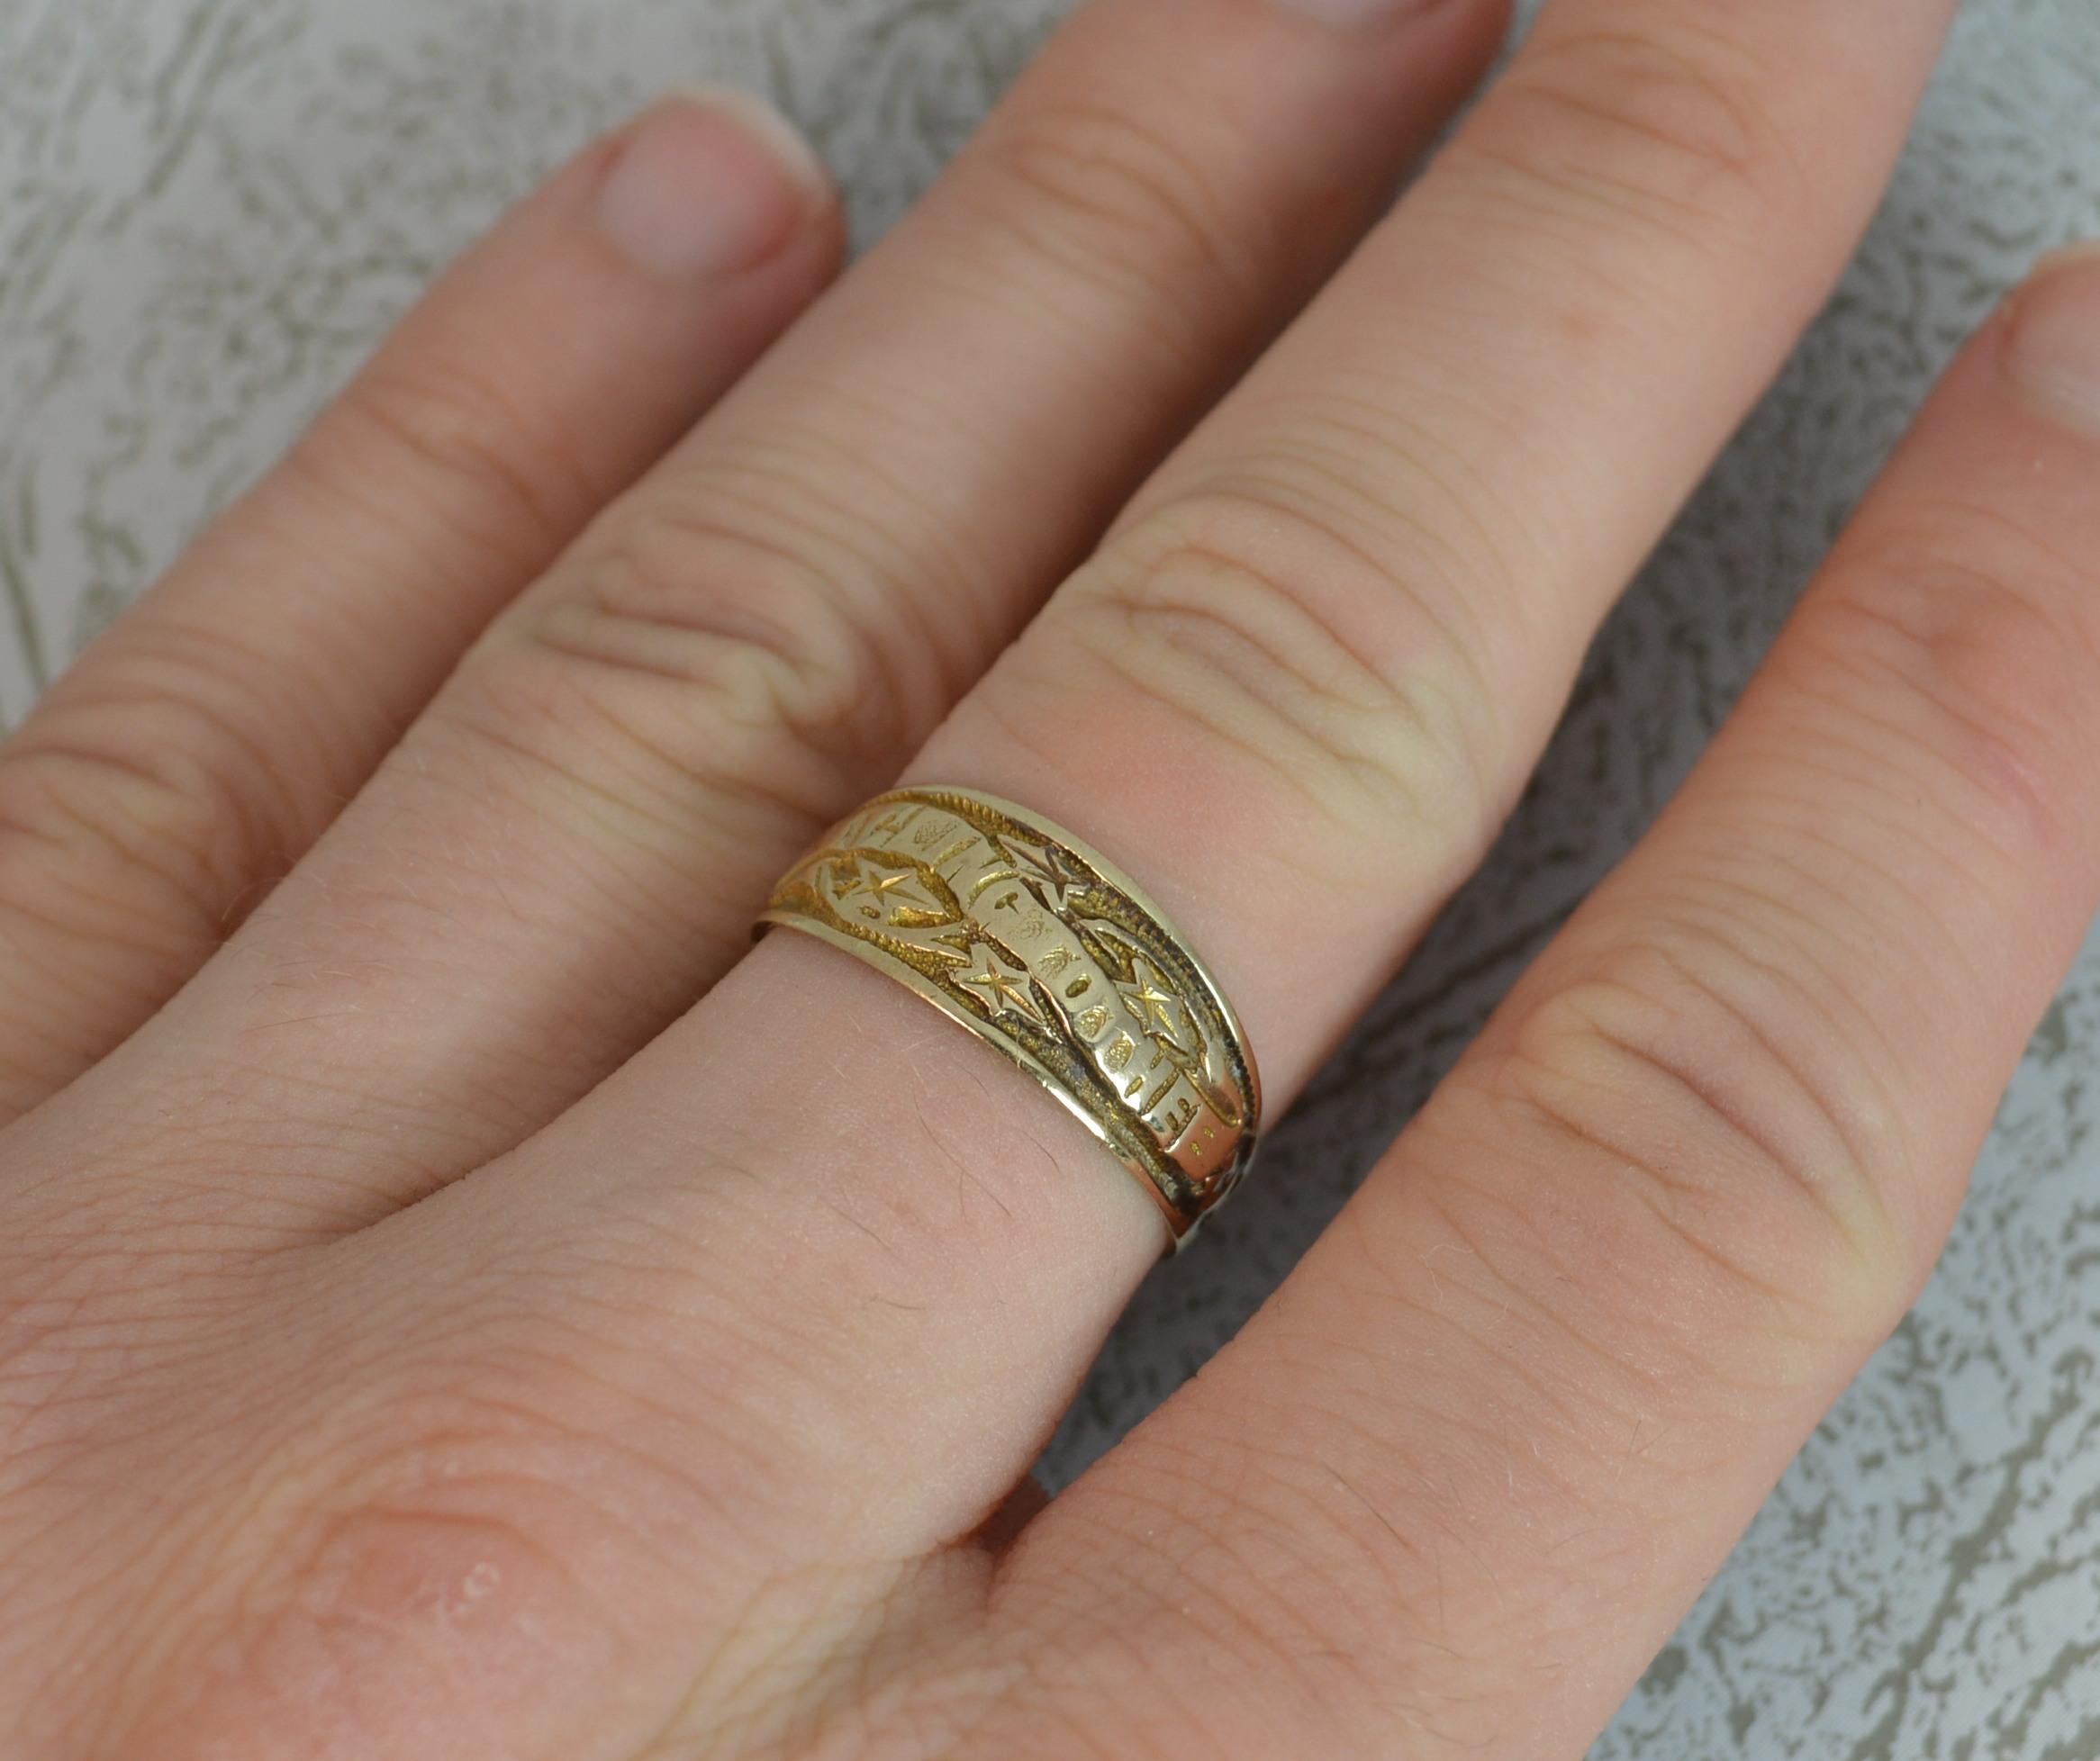 A superb Edwardian period band ring in solid 9 carat rose gold with hand engraved design.
SIZE ; P UK, 7 3/4 US
​Designed with the phrase 'I Cling To Thee'. The statement is rendered in bold capital block letters with a smooth surface against a